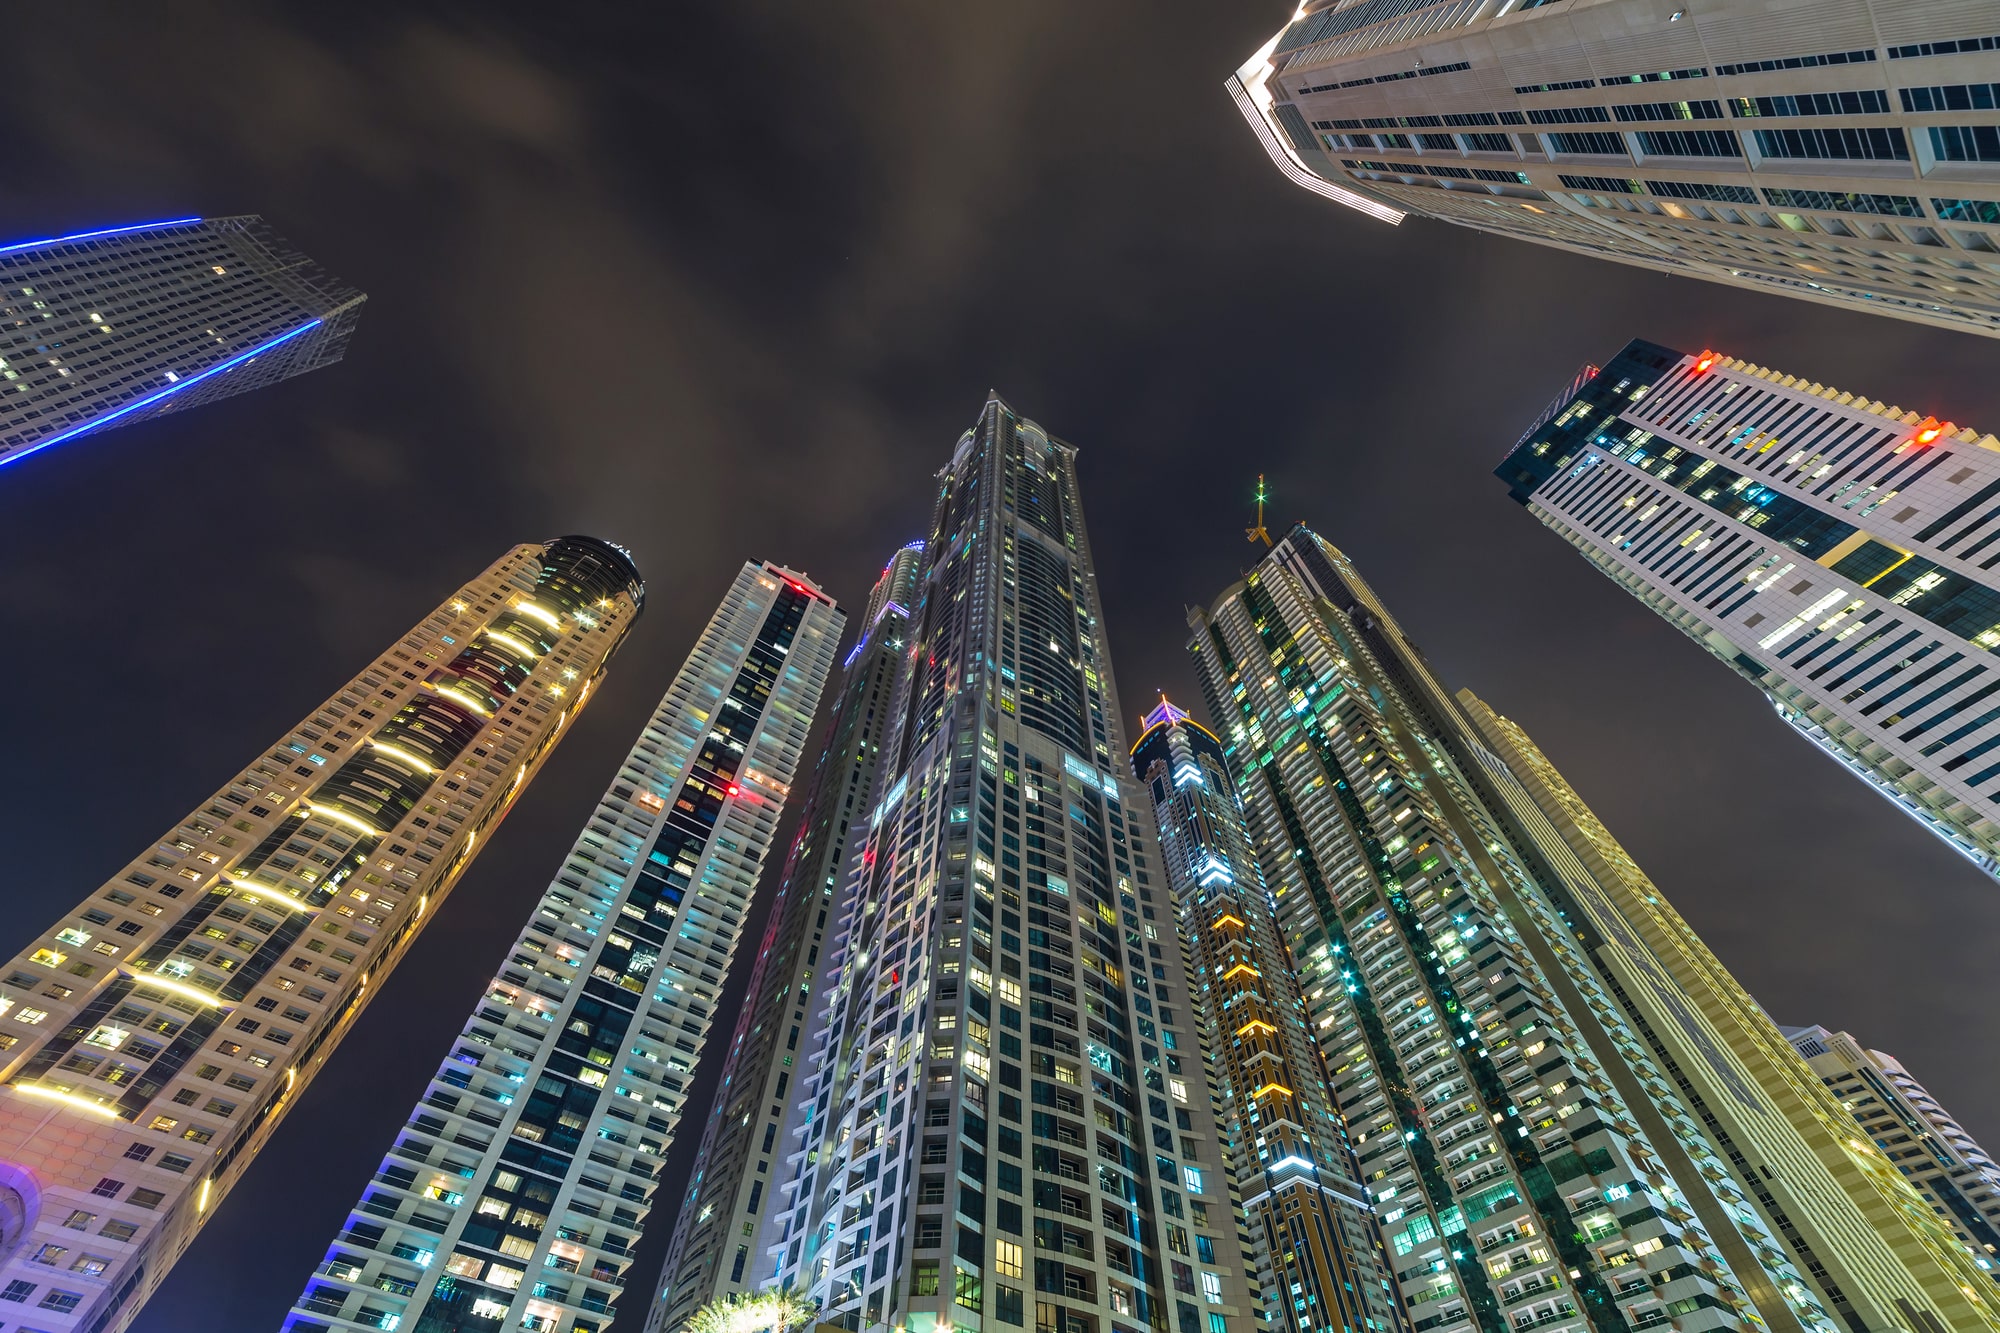 Dubai becomes a haven for crypto enthusiasts